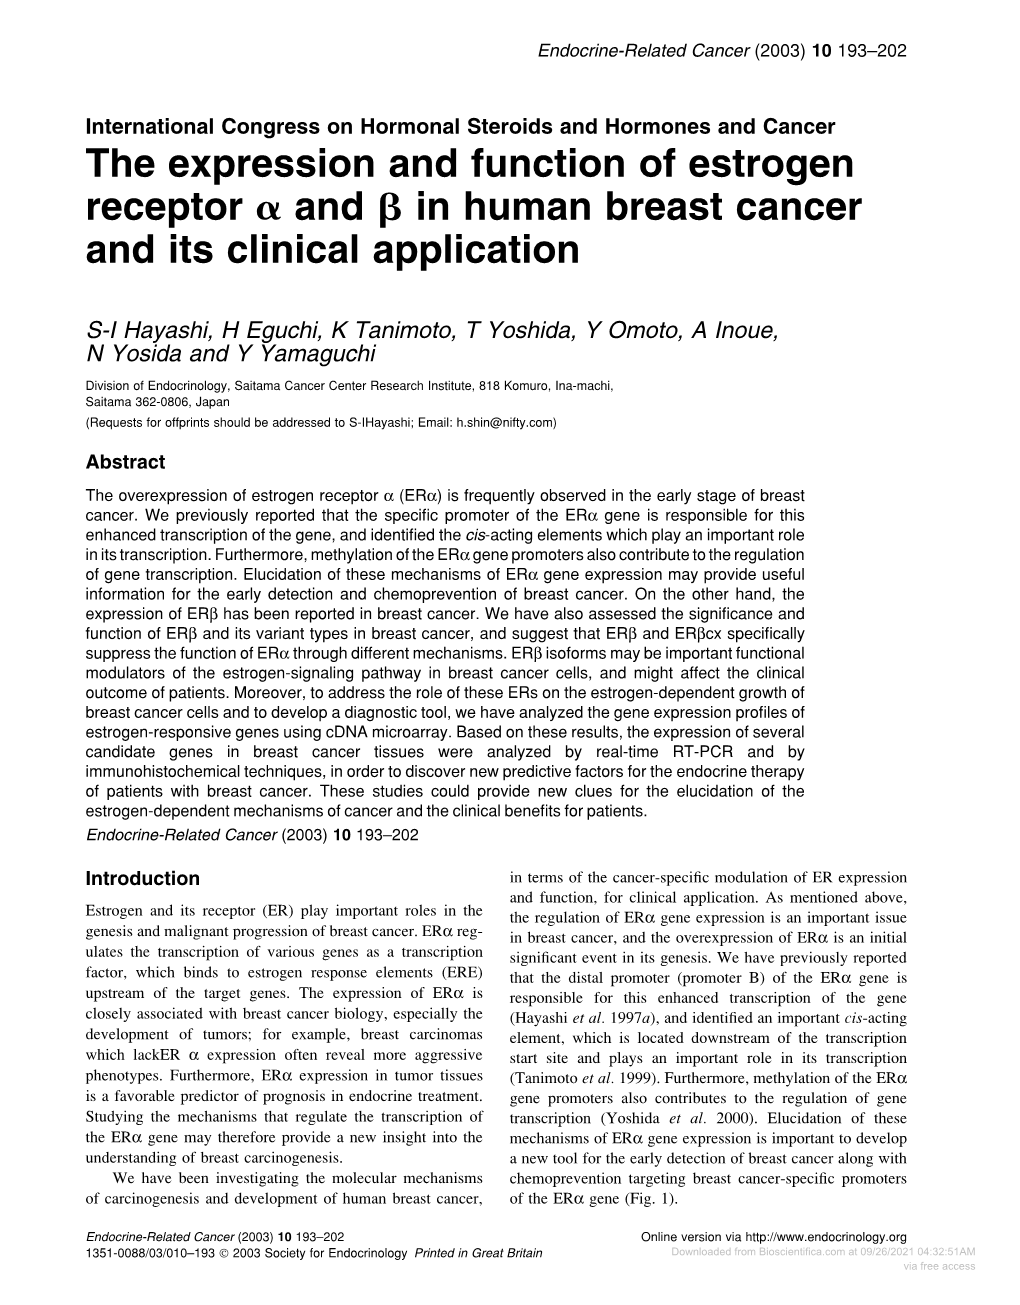 The Expression and Function of Estrogen Receptor and in Human